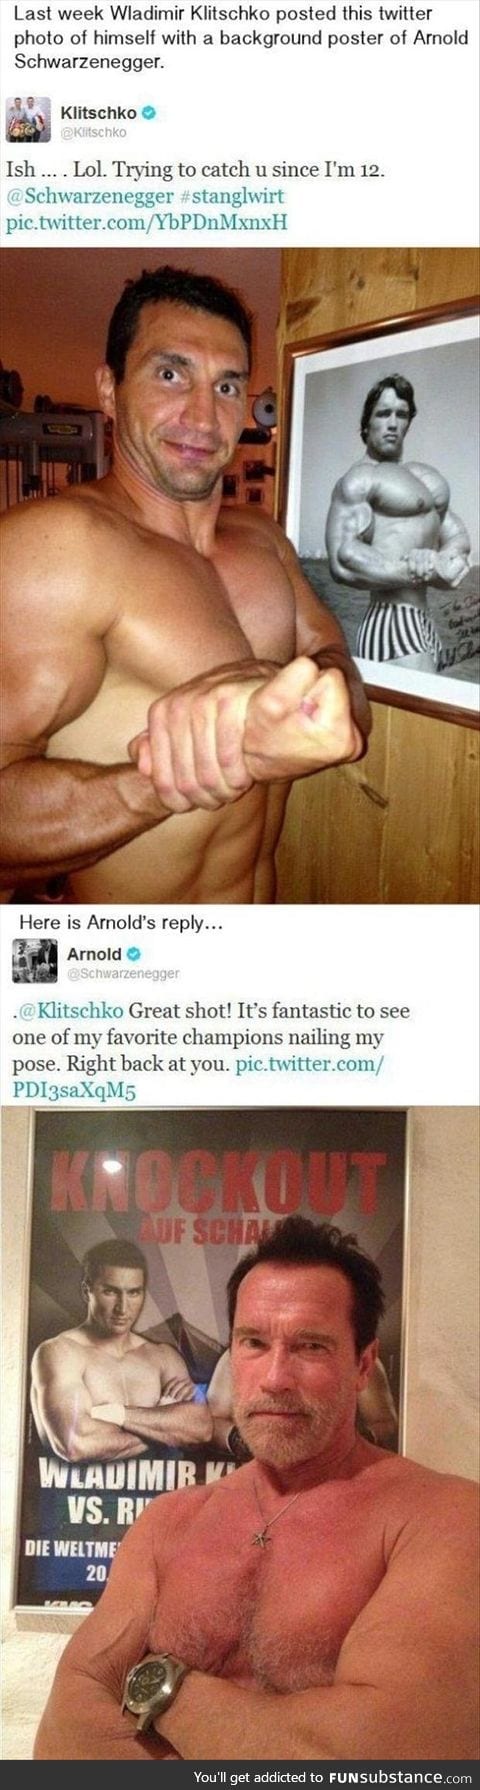 Oh arnold